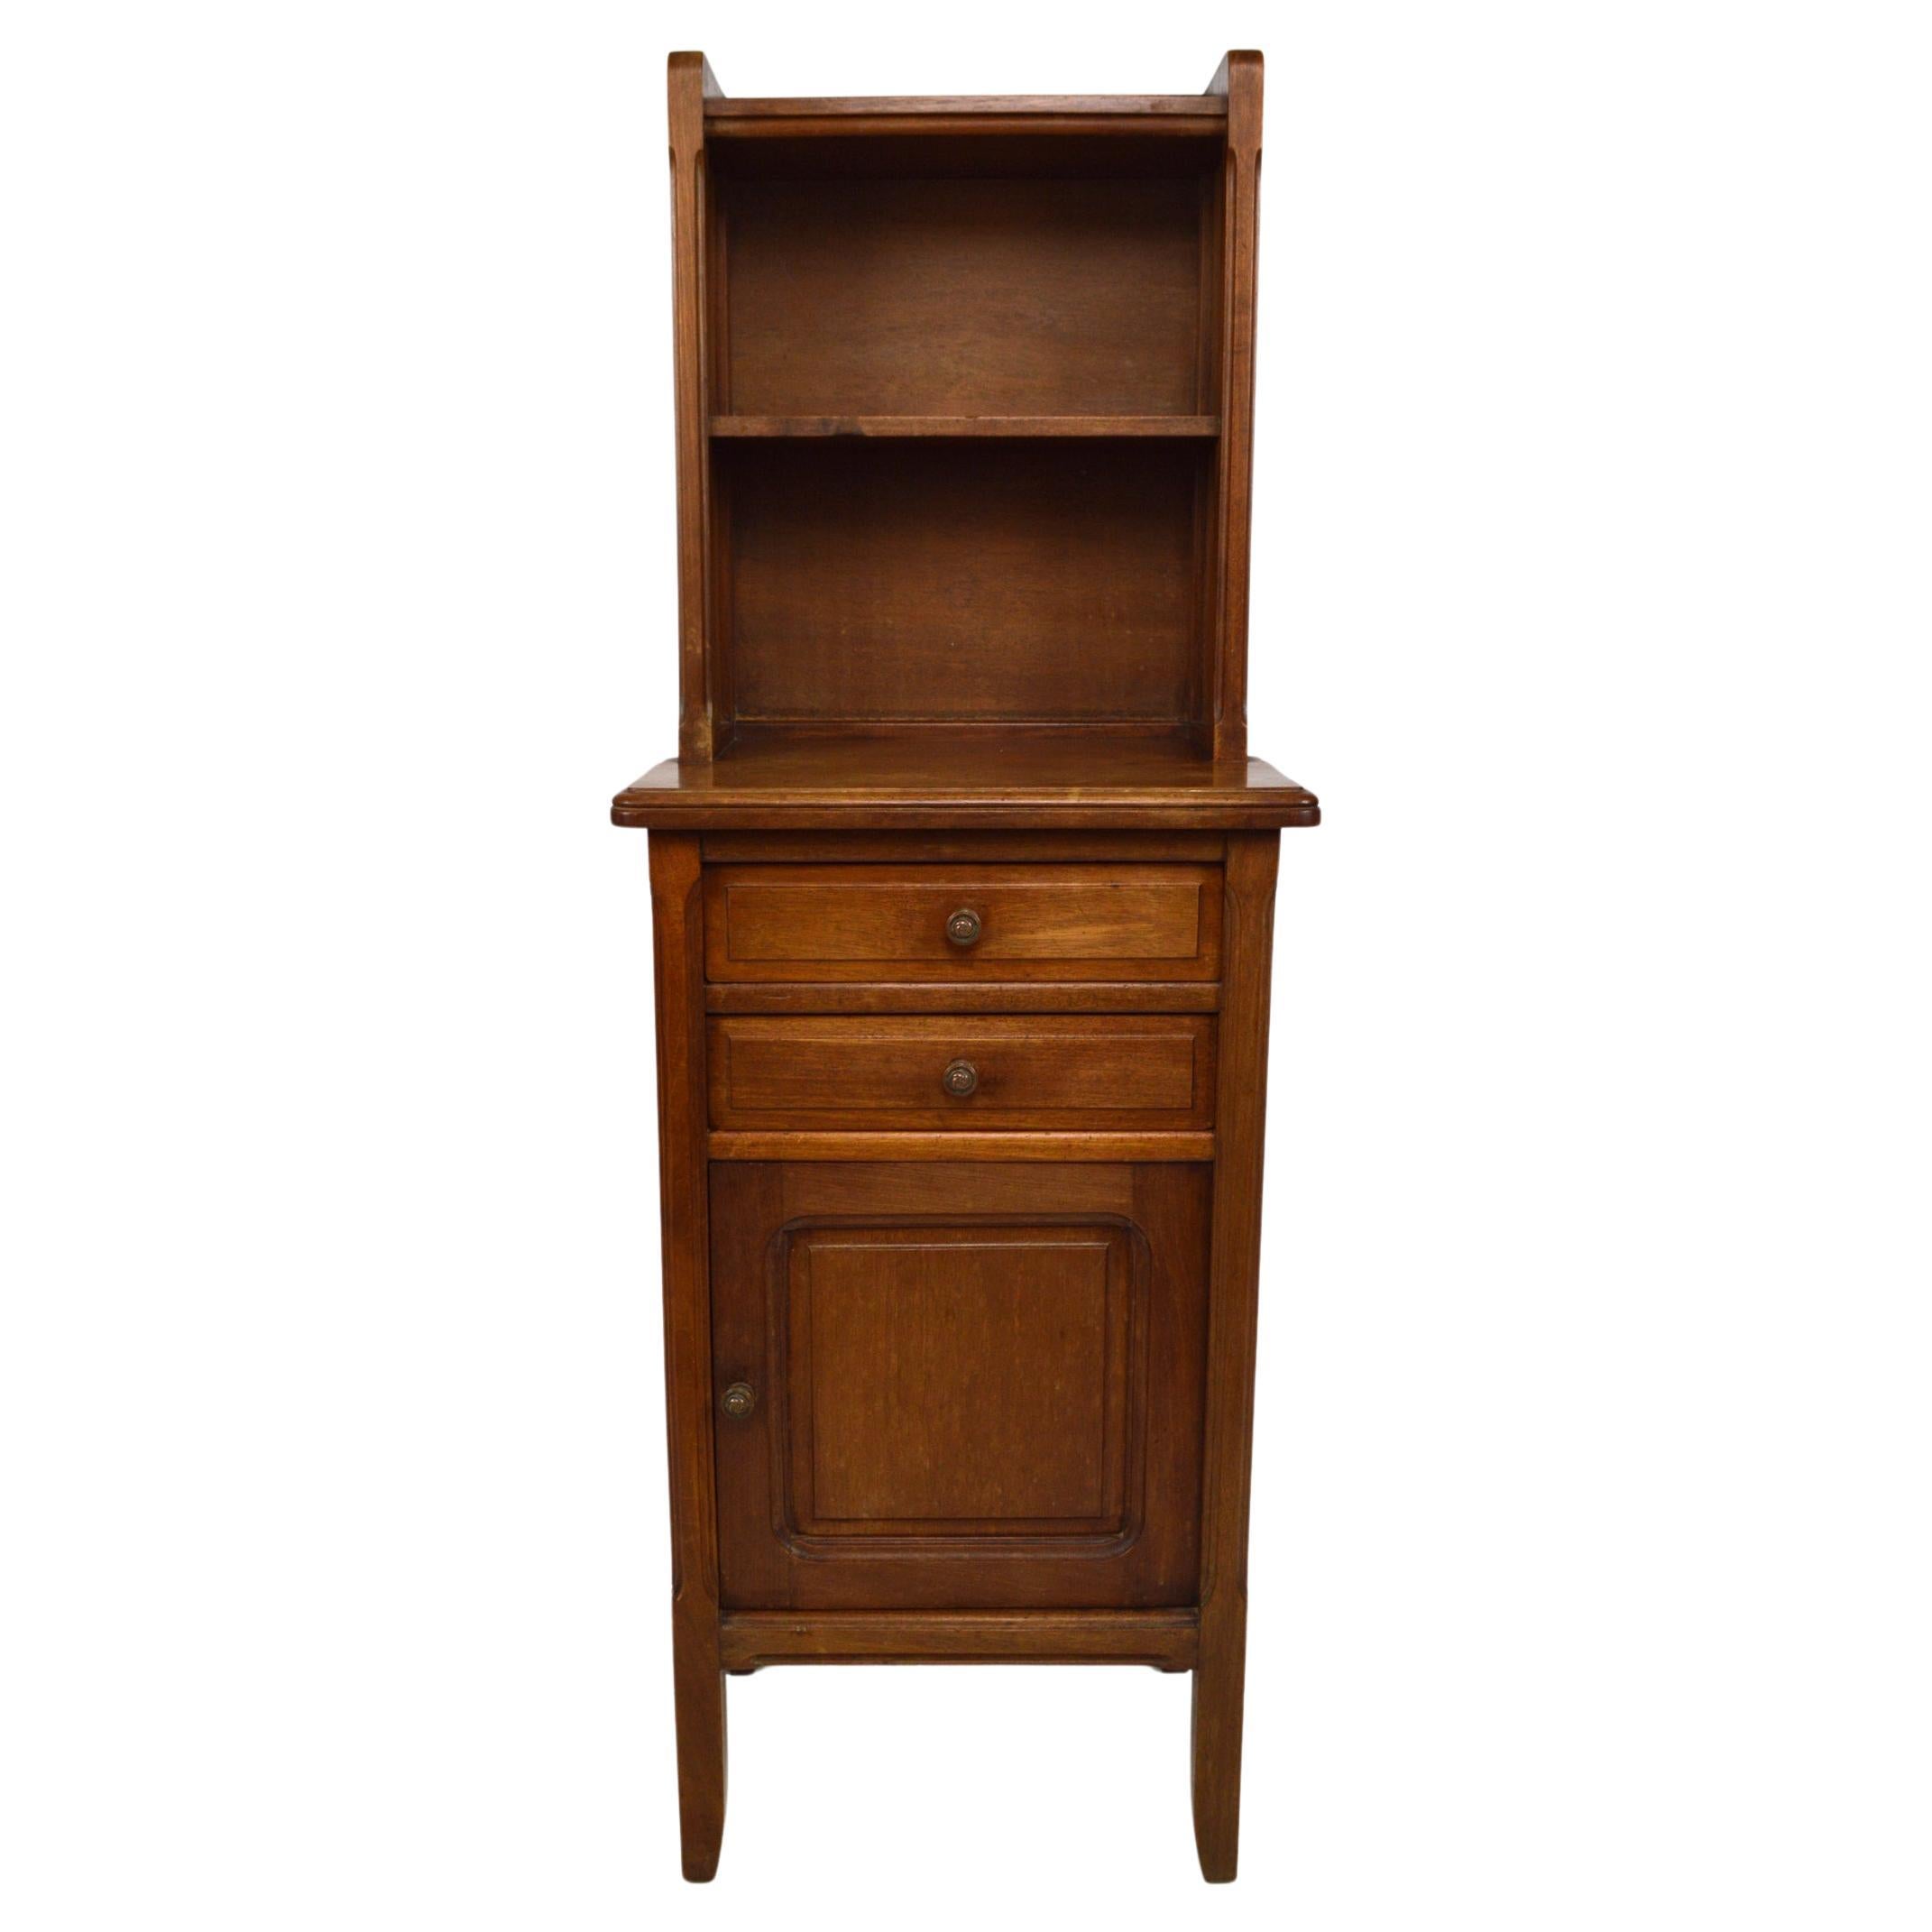 Art Nouveau Bedside Table by Mathieu Gallerey in Mahogany, France, circa 1920 For Sale